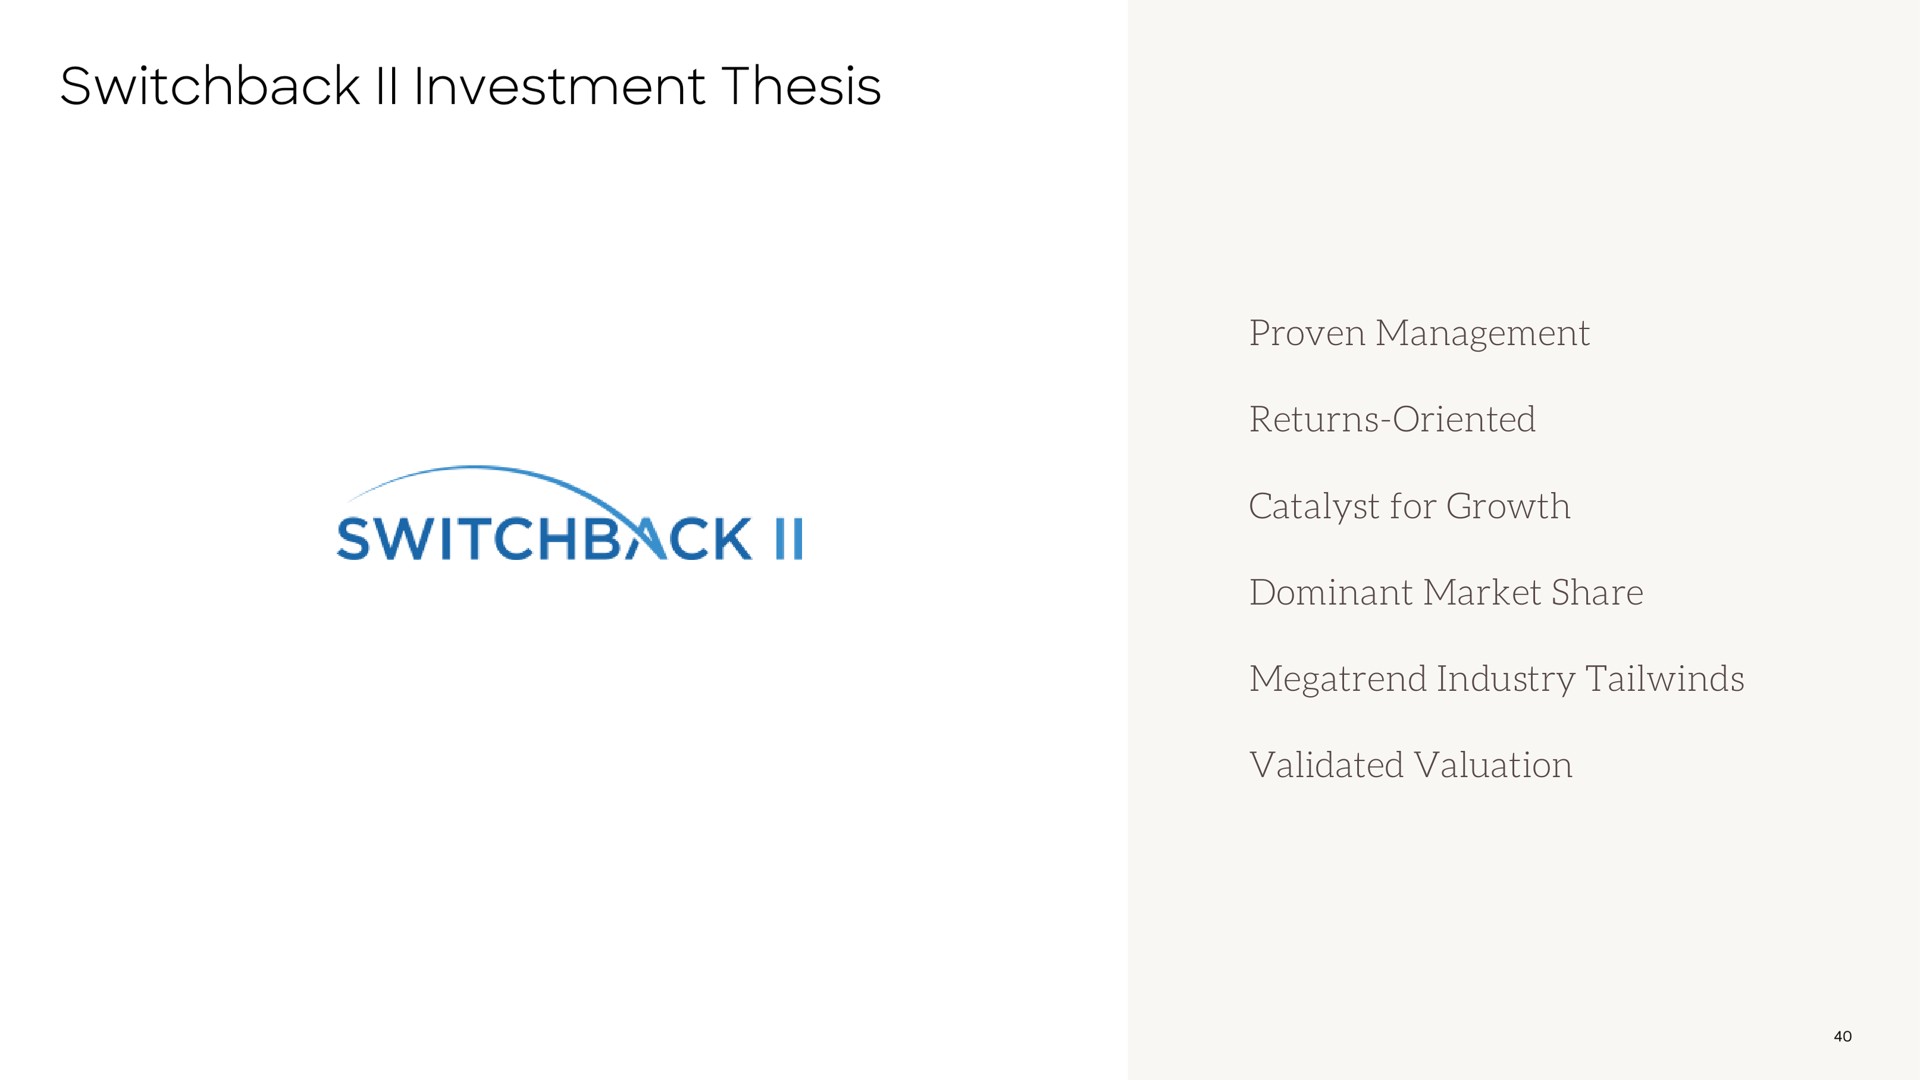 discount to proven management returns oriented catalyst for growth dominant market share industry validated valuation switchback investment thesis switchback | Bird